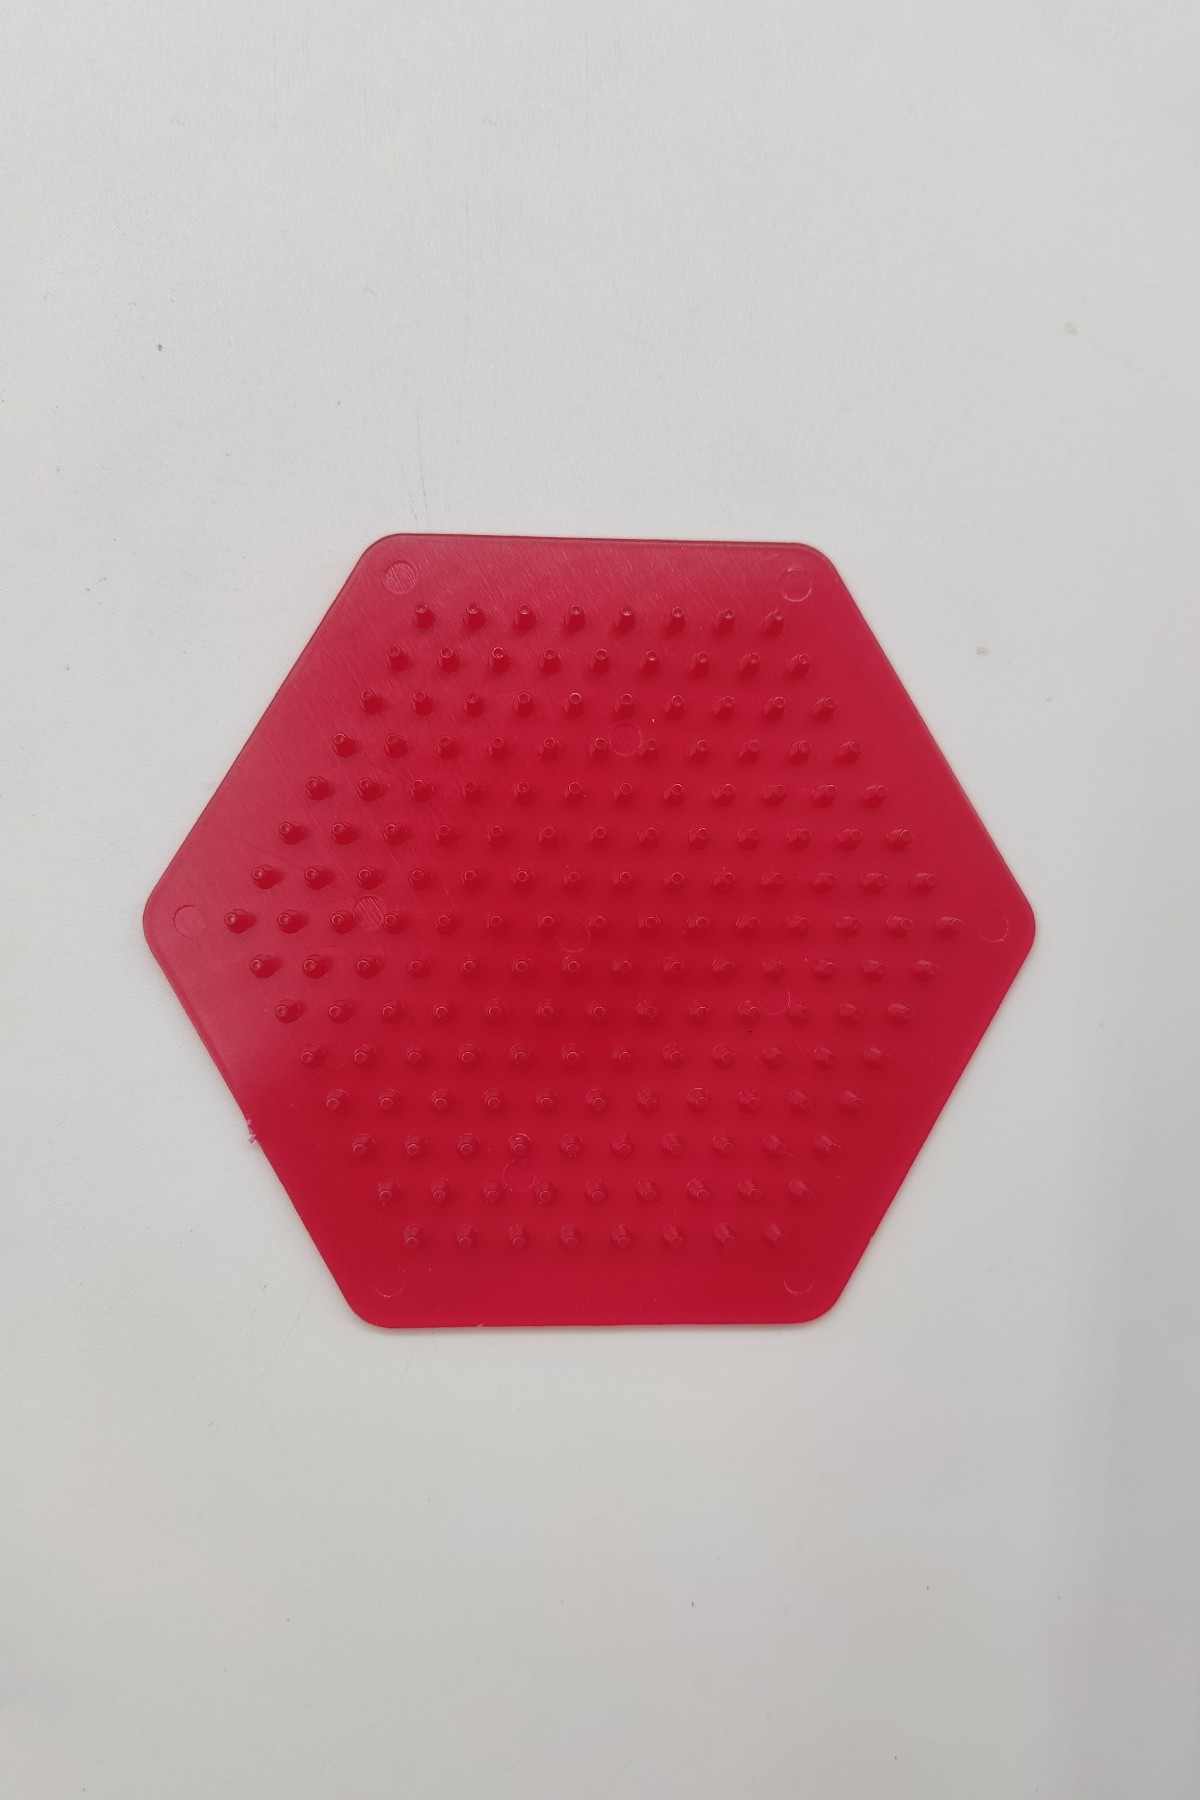 Pixel Pixel Pegboard For Beading Tray-Red Hexagon PPP16-12